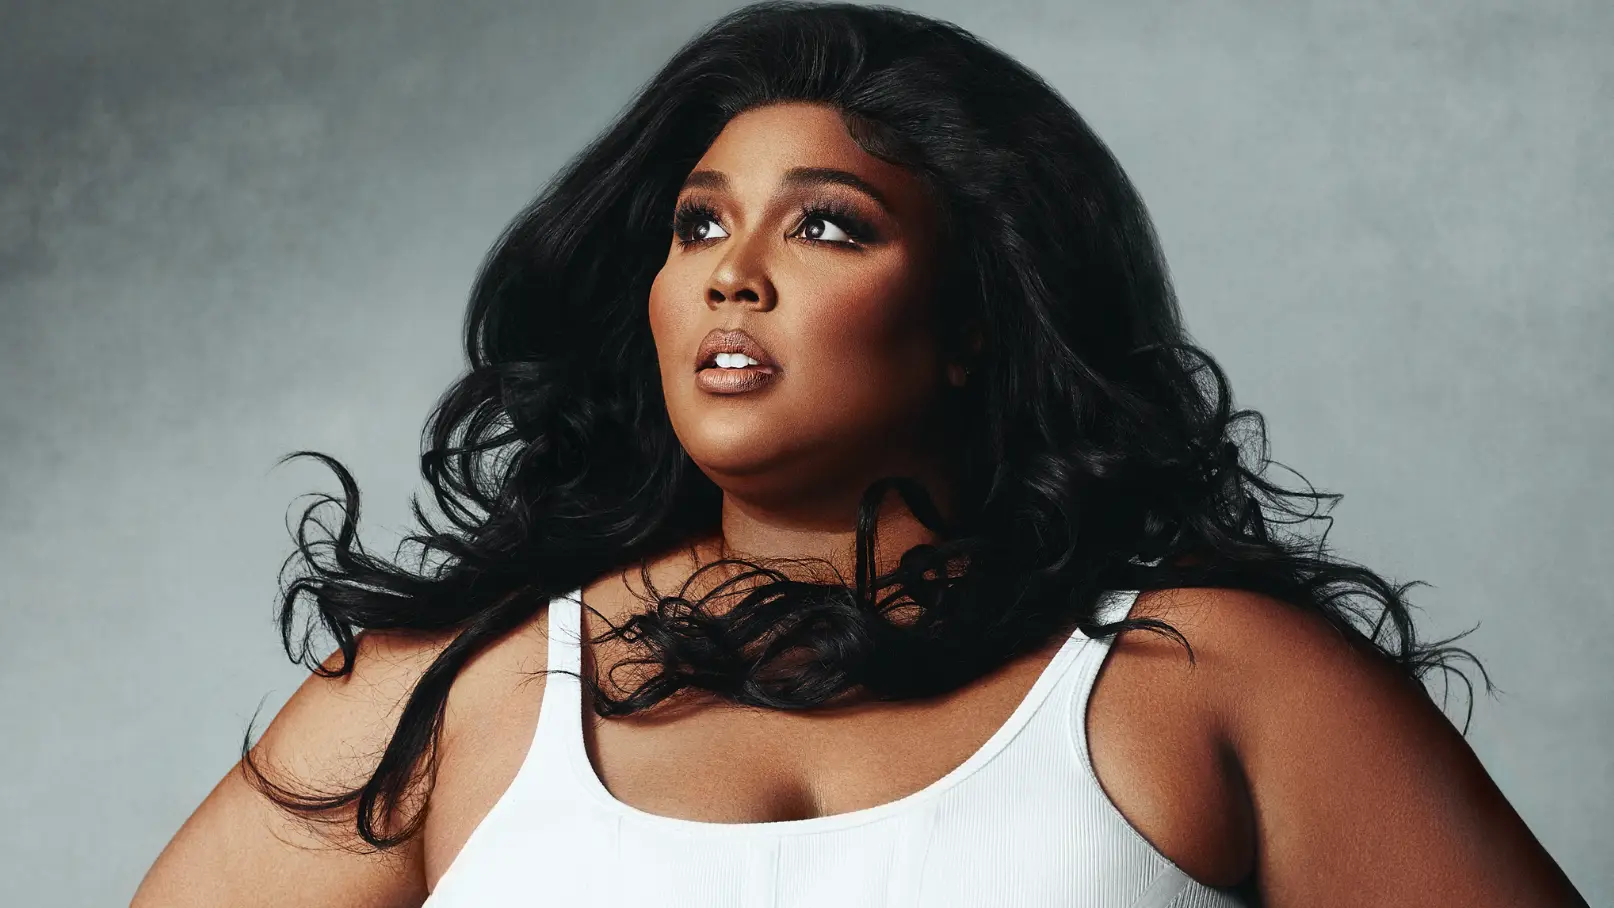 Emmy-winning artist Lizzo speaks out about inherent racism in music genre's.